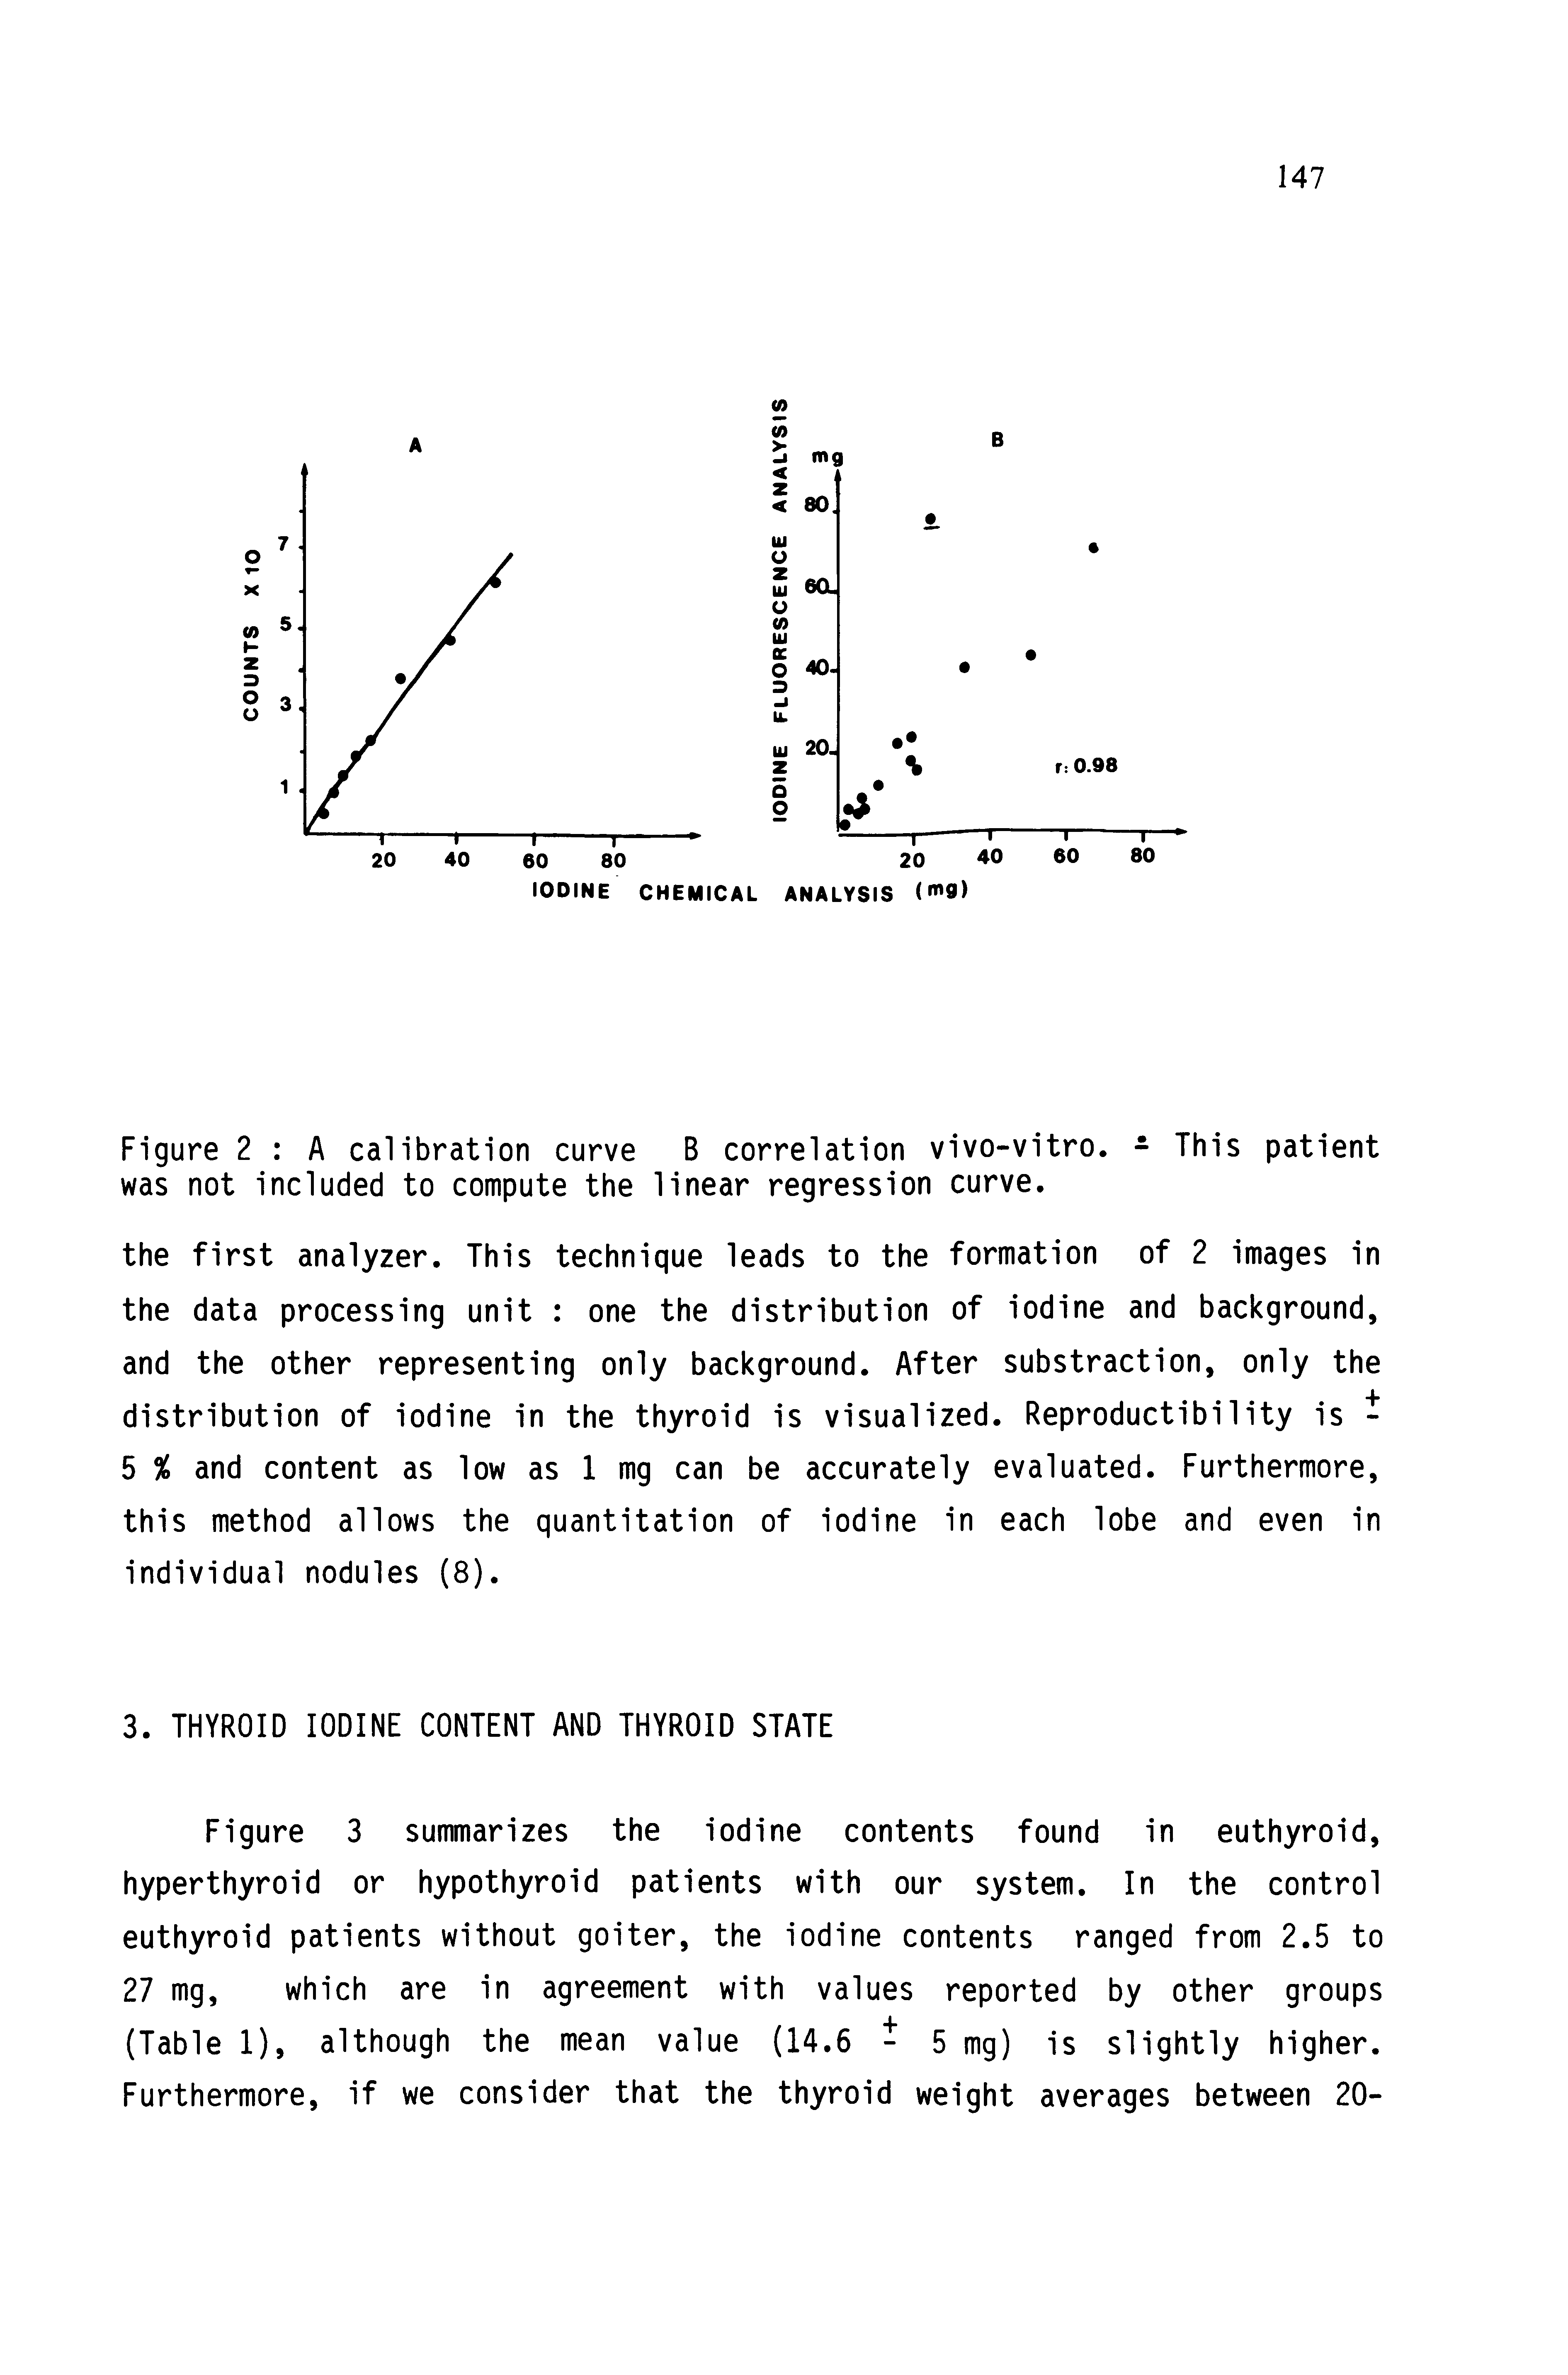 Figure 2 A calibration curve B correlation vivo-vitro. - This patient was not included to compute the linear regression curve.